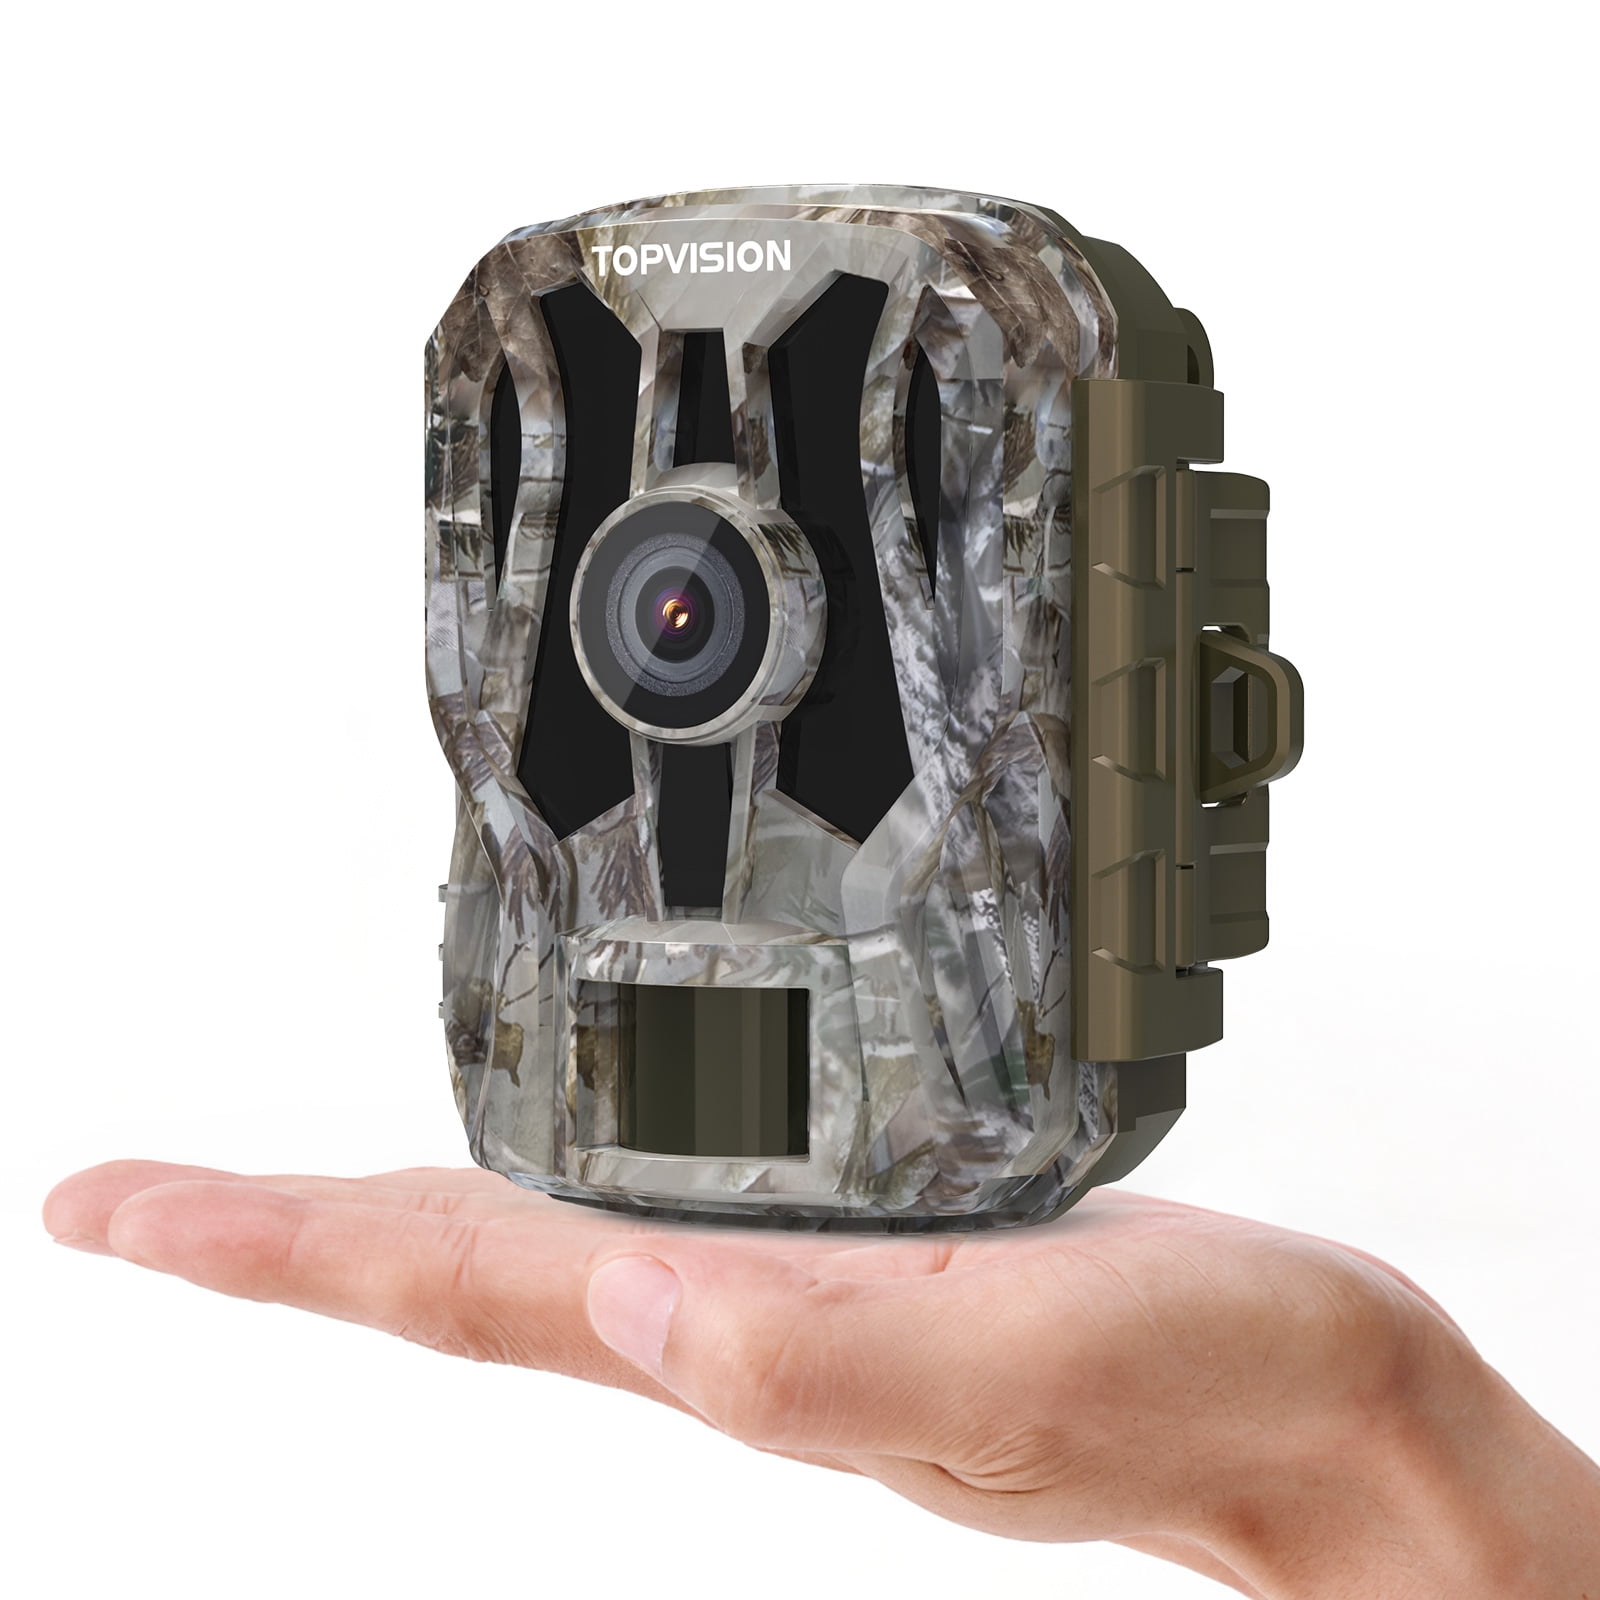 WGICM0724 Trail Camera - Wildgame Terra Extreme Lightsout 18MP 60ft - New! 